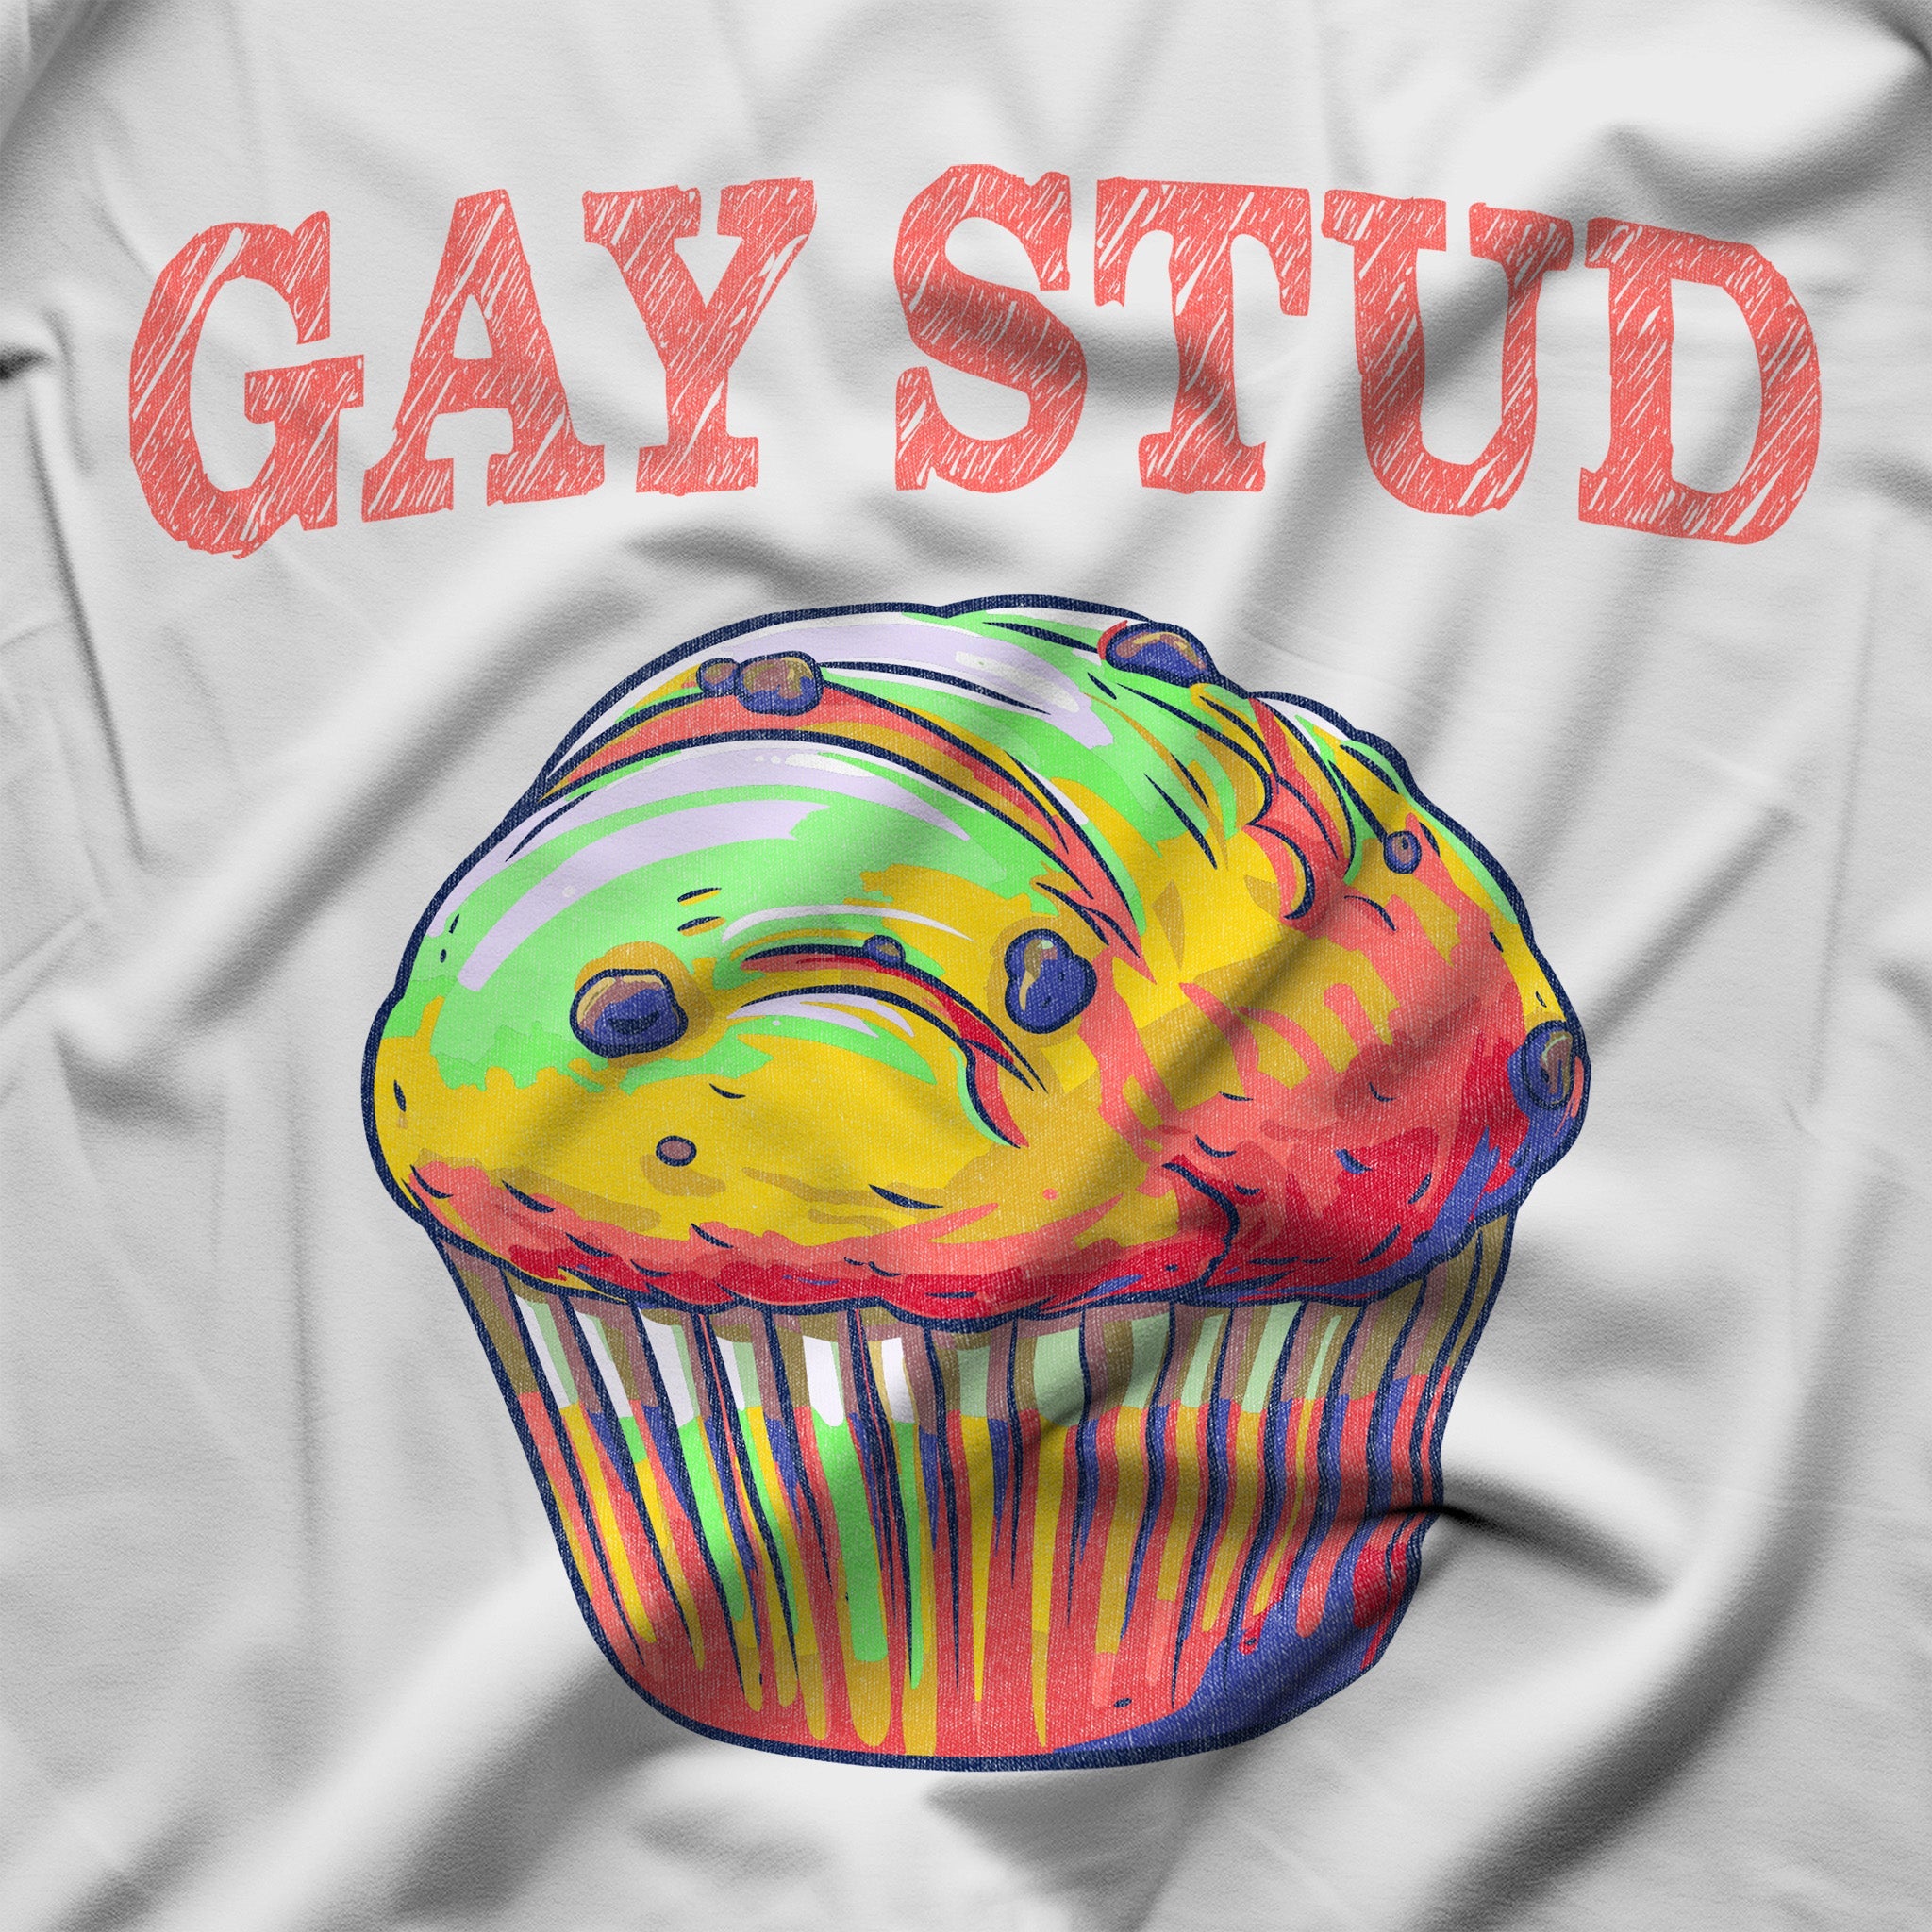 Gay Stud Muffin Tank Top - Show Off Your Sweet Style - Hunky Tops#color_white